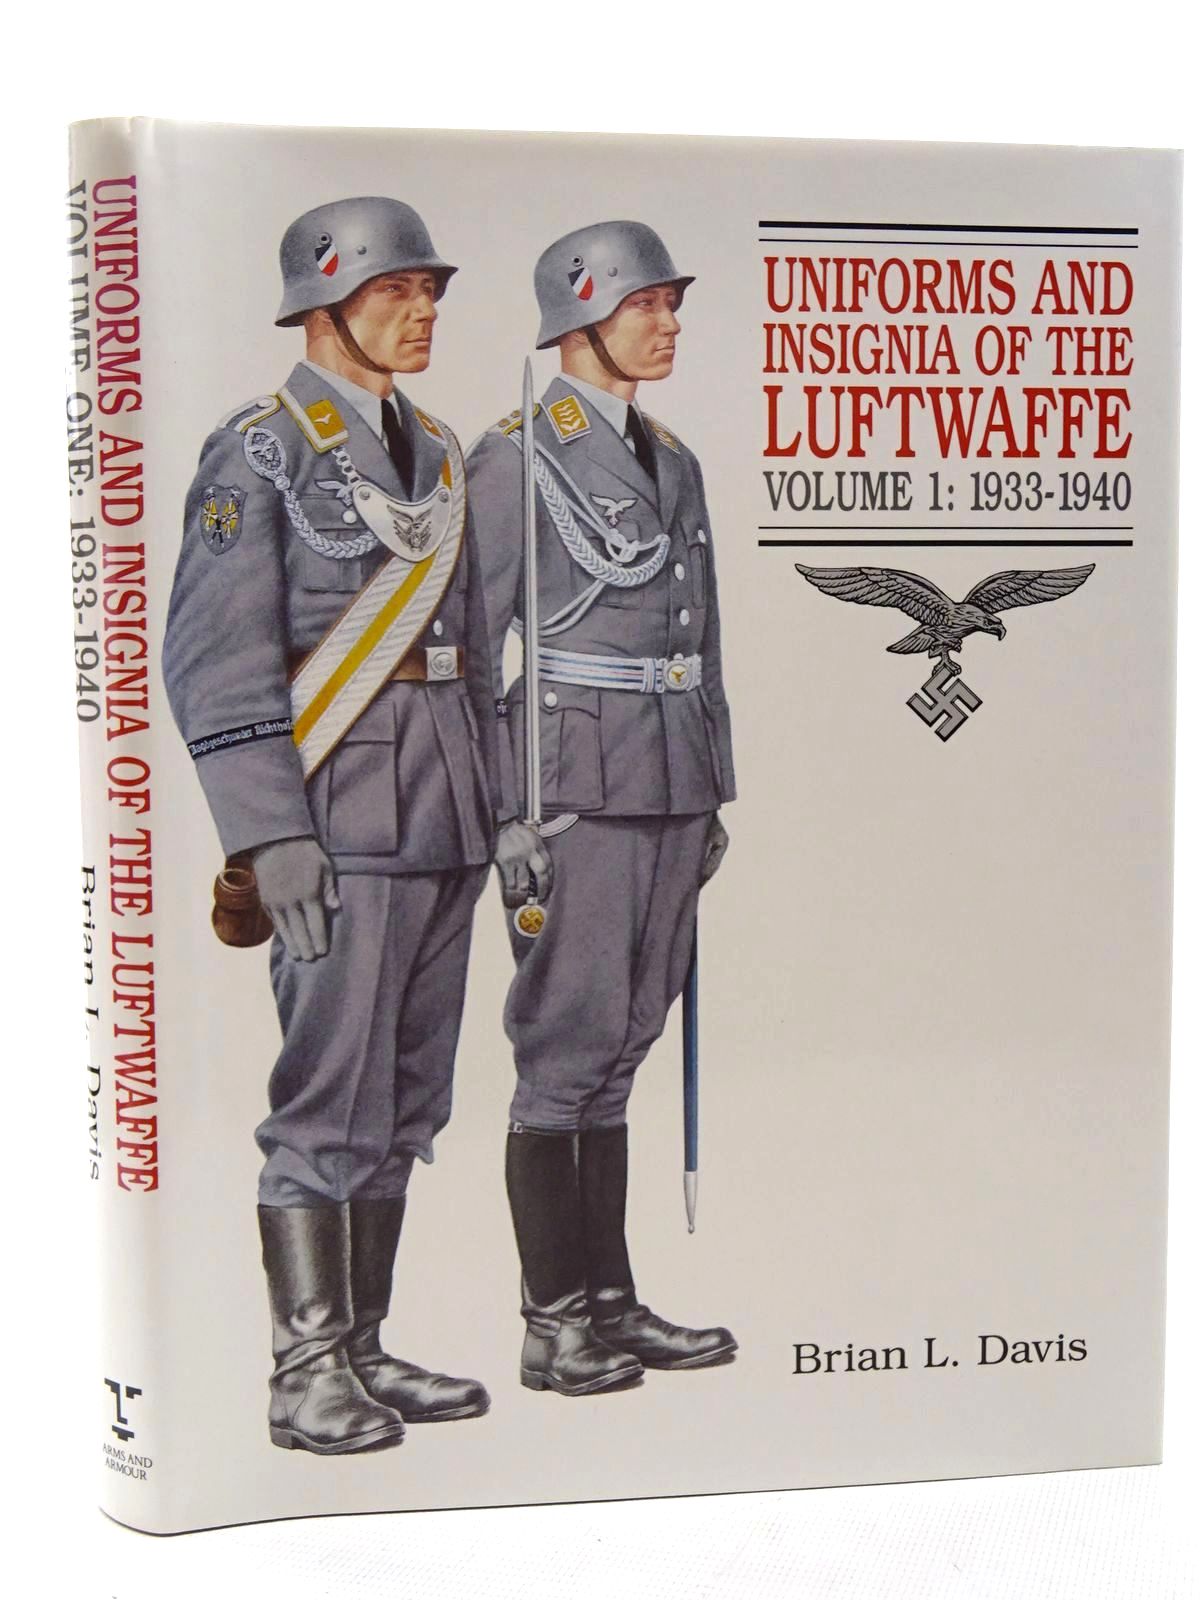 Stella & Rose's Books : UNIFORMS AND INSIGNIA OF THE LUFTWAFFE